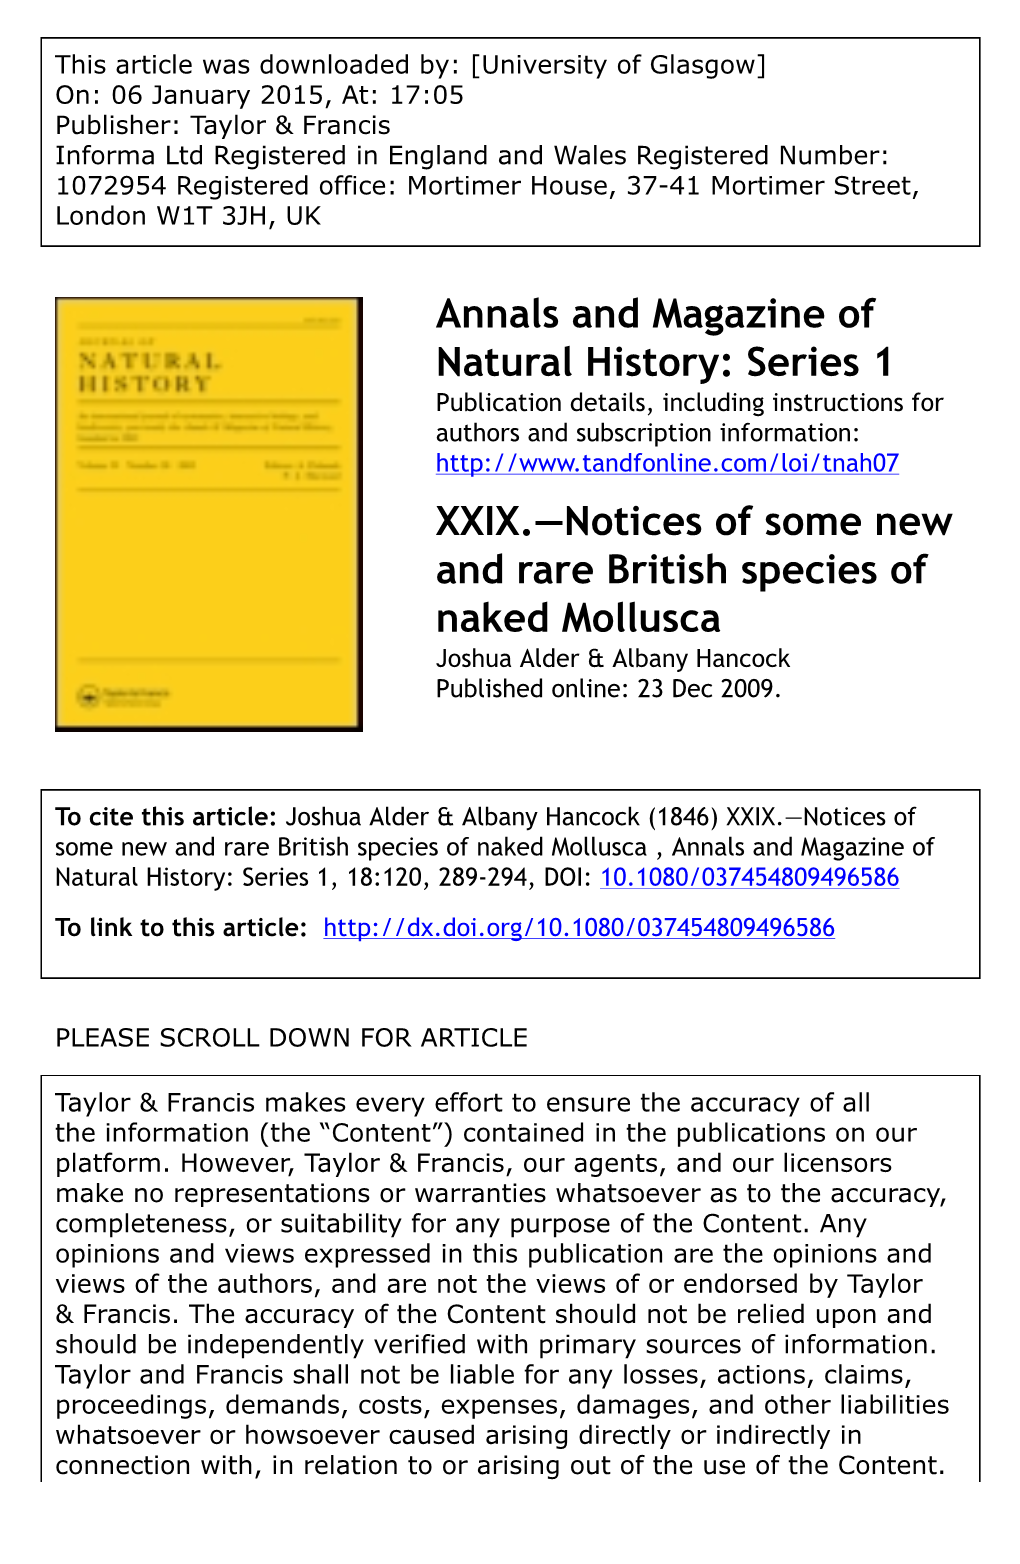 Series 1 XXIX.—Notices of Some New and Rare British Species Of